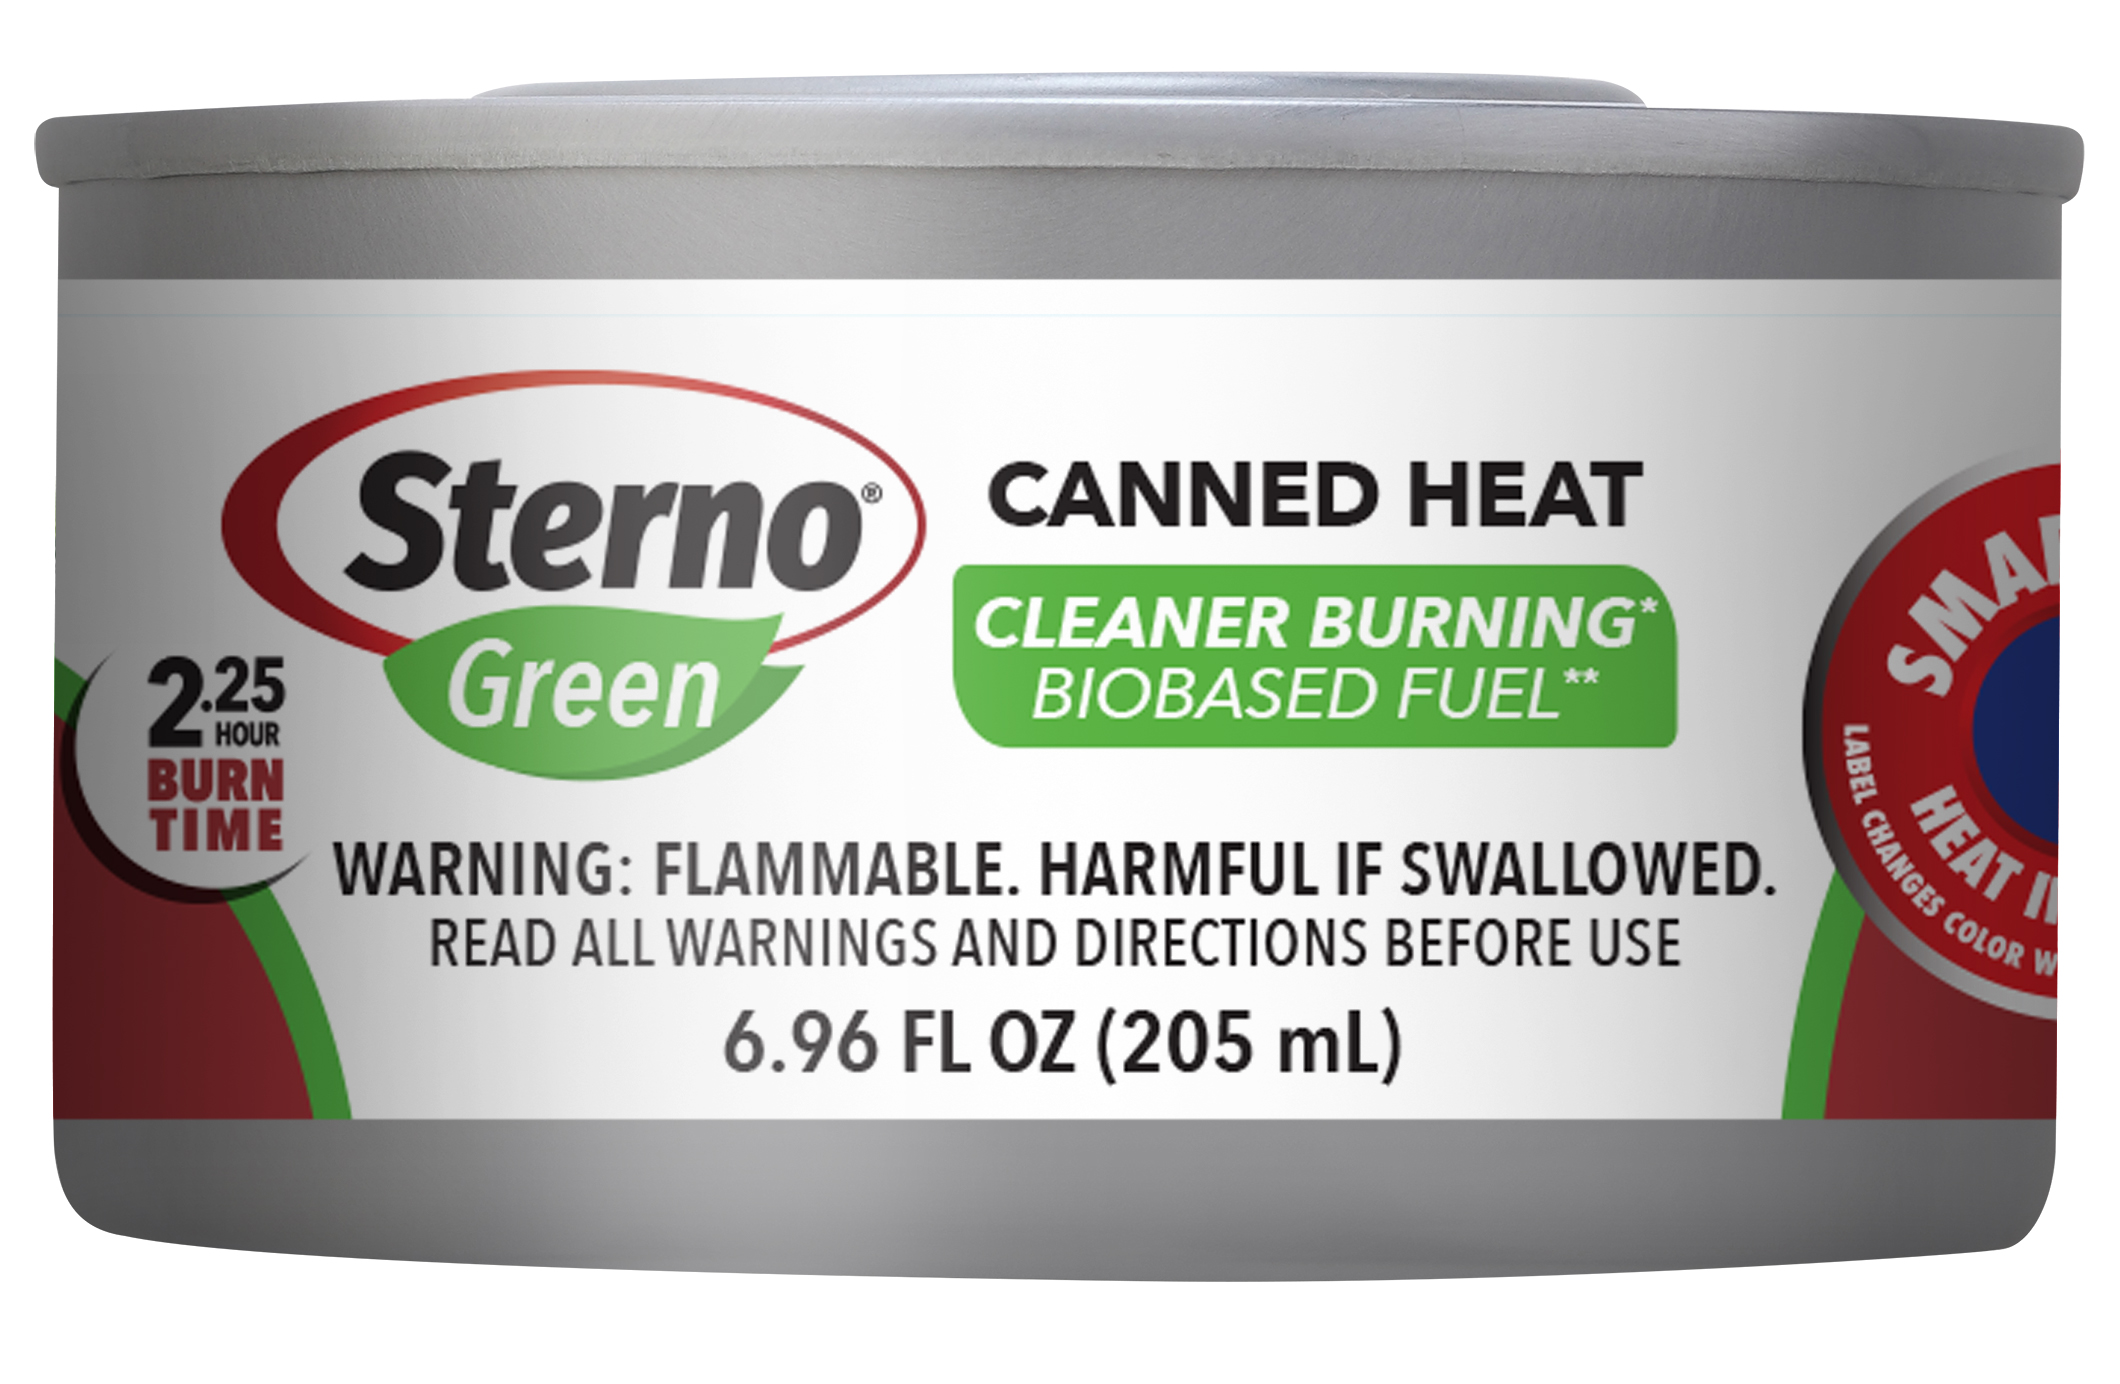 Sterno 2.25 Hour Canned Heat Ethanol Gel Chafing Fuel, USDA Certified Bio-Based, 6.1oz - image 1 of 8